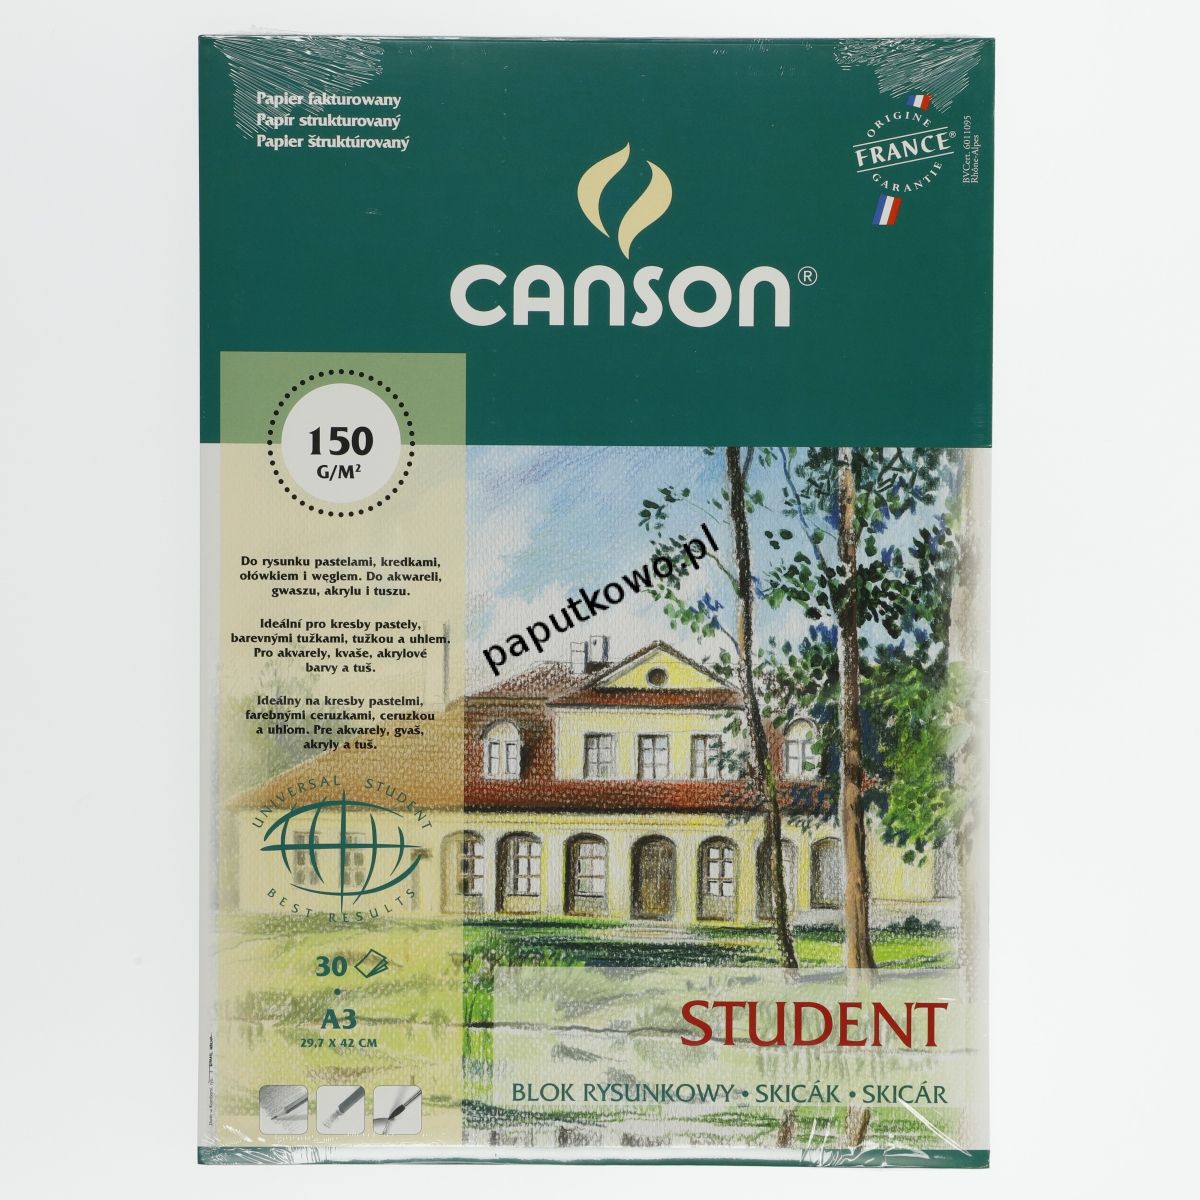 Blok rysunkowy Canson Student (400084730) 1